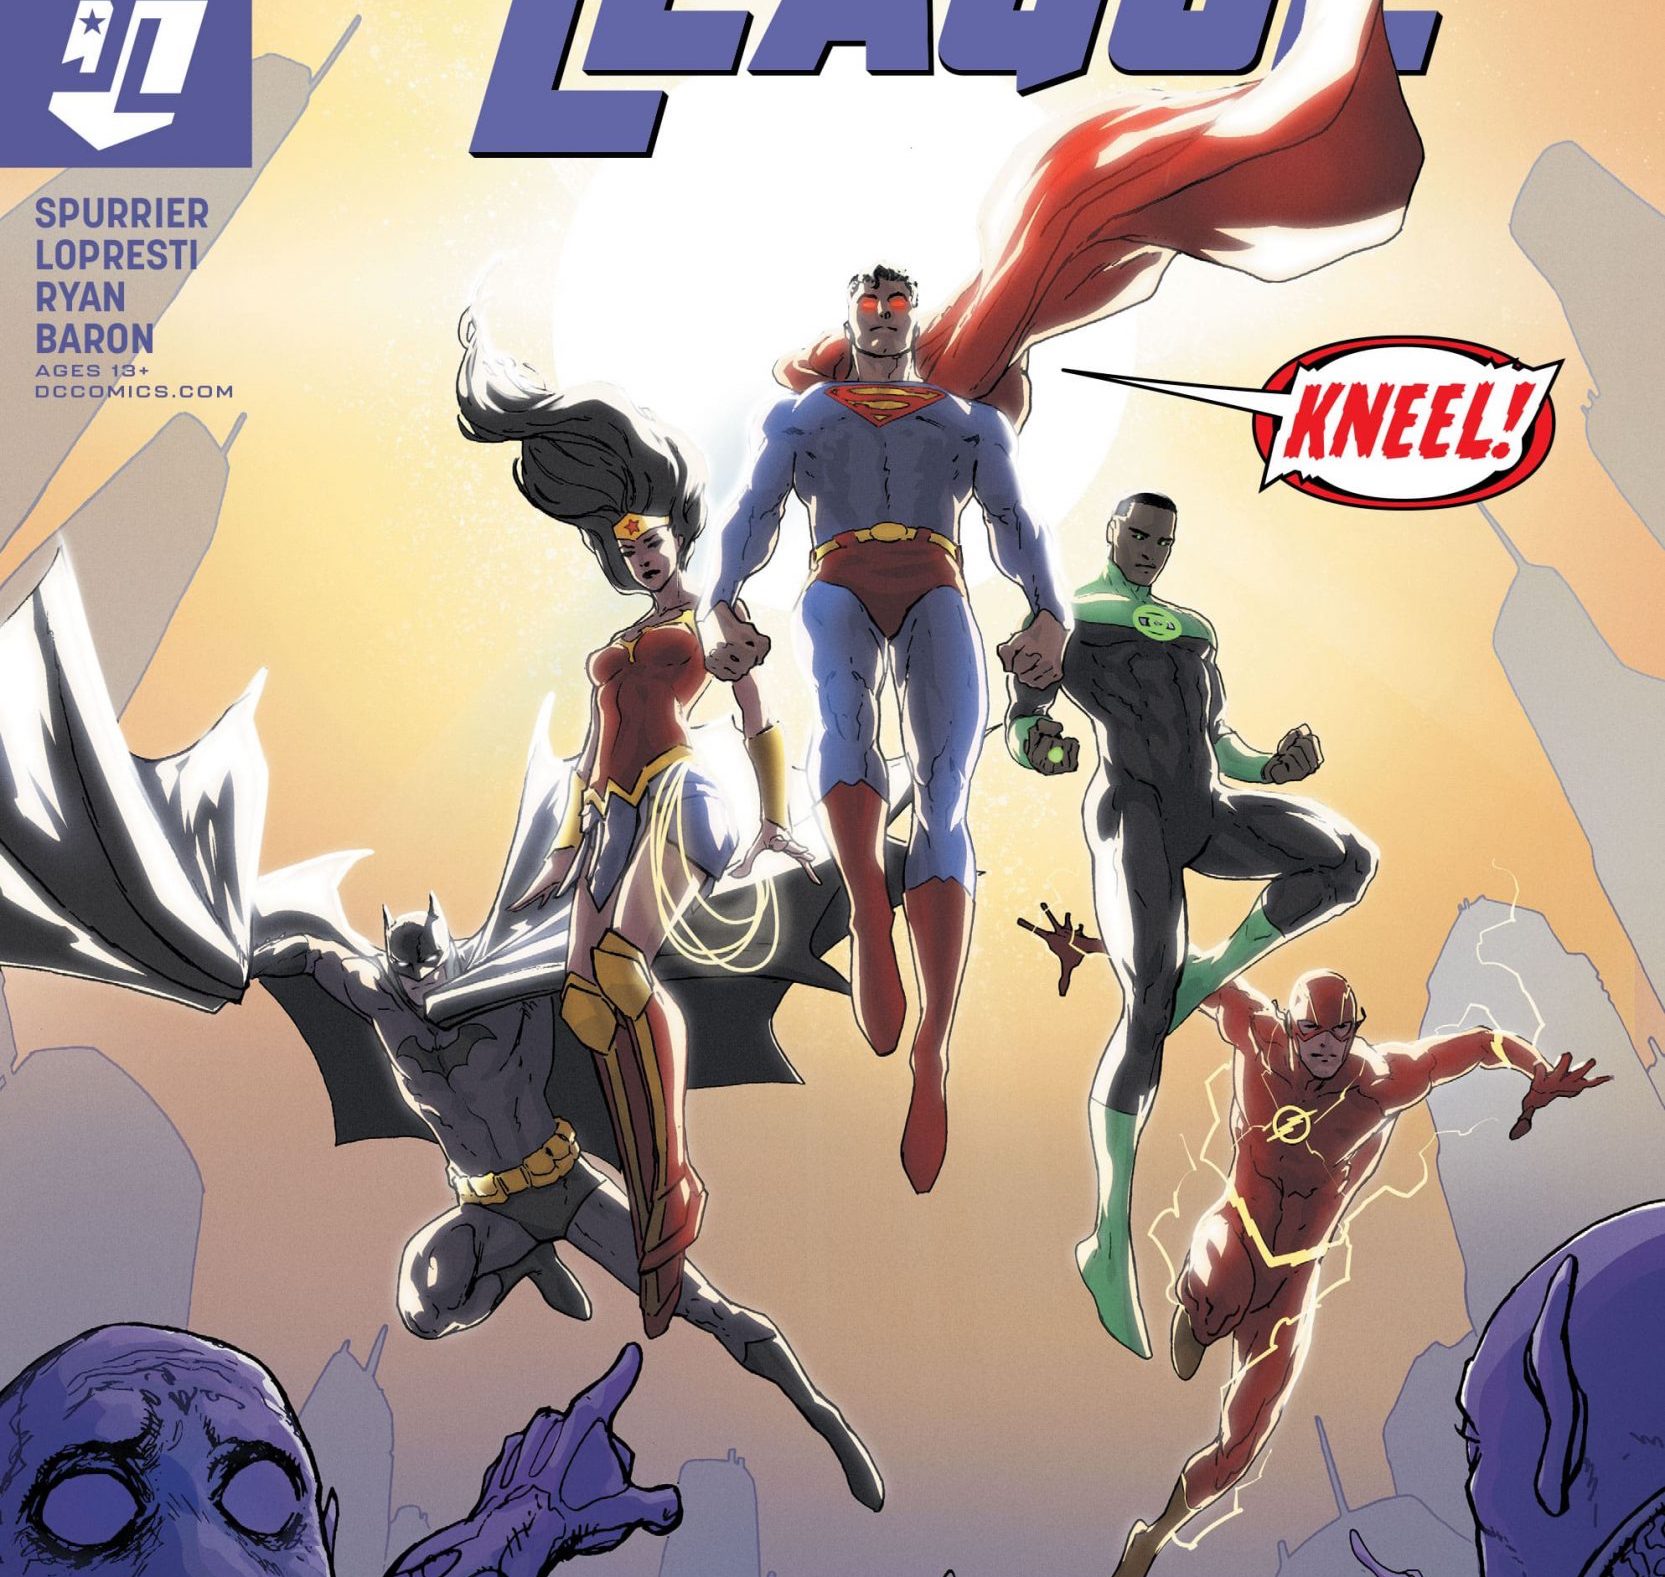 'Justice League' #48 review: Good sci-fi and great team chemistry